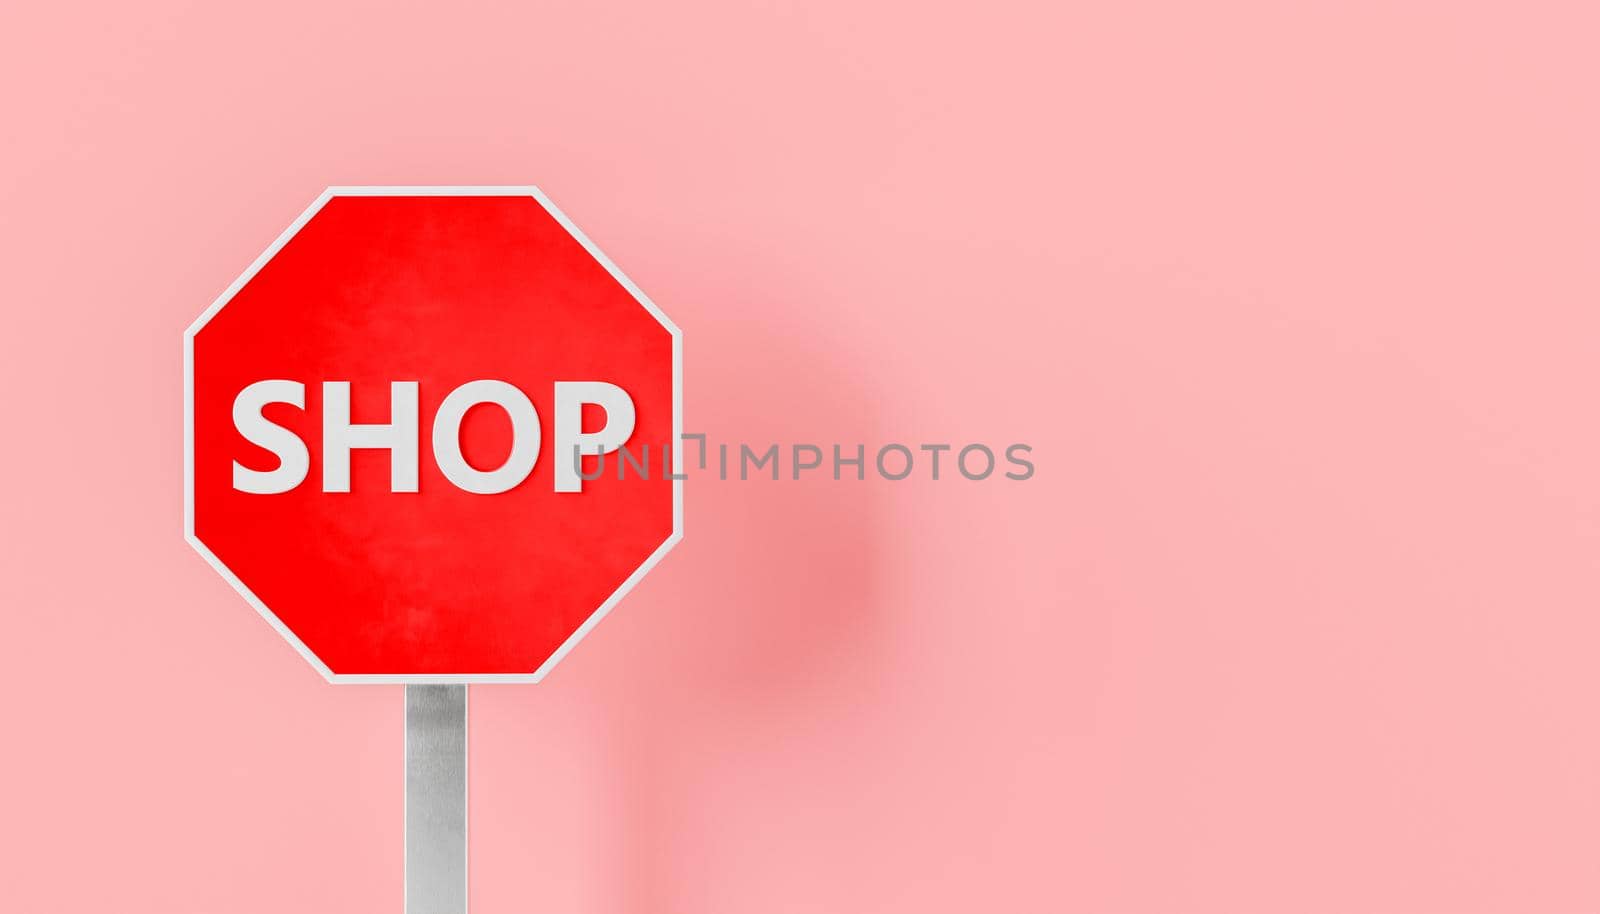 3D illustration of octagonal red sign with white Shop inscription against pink background